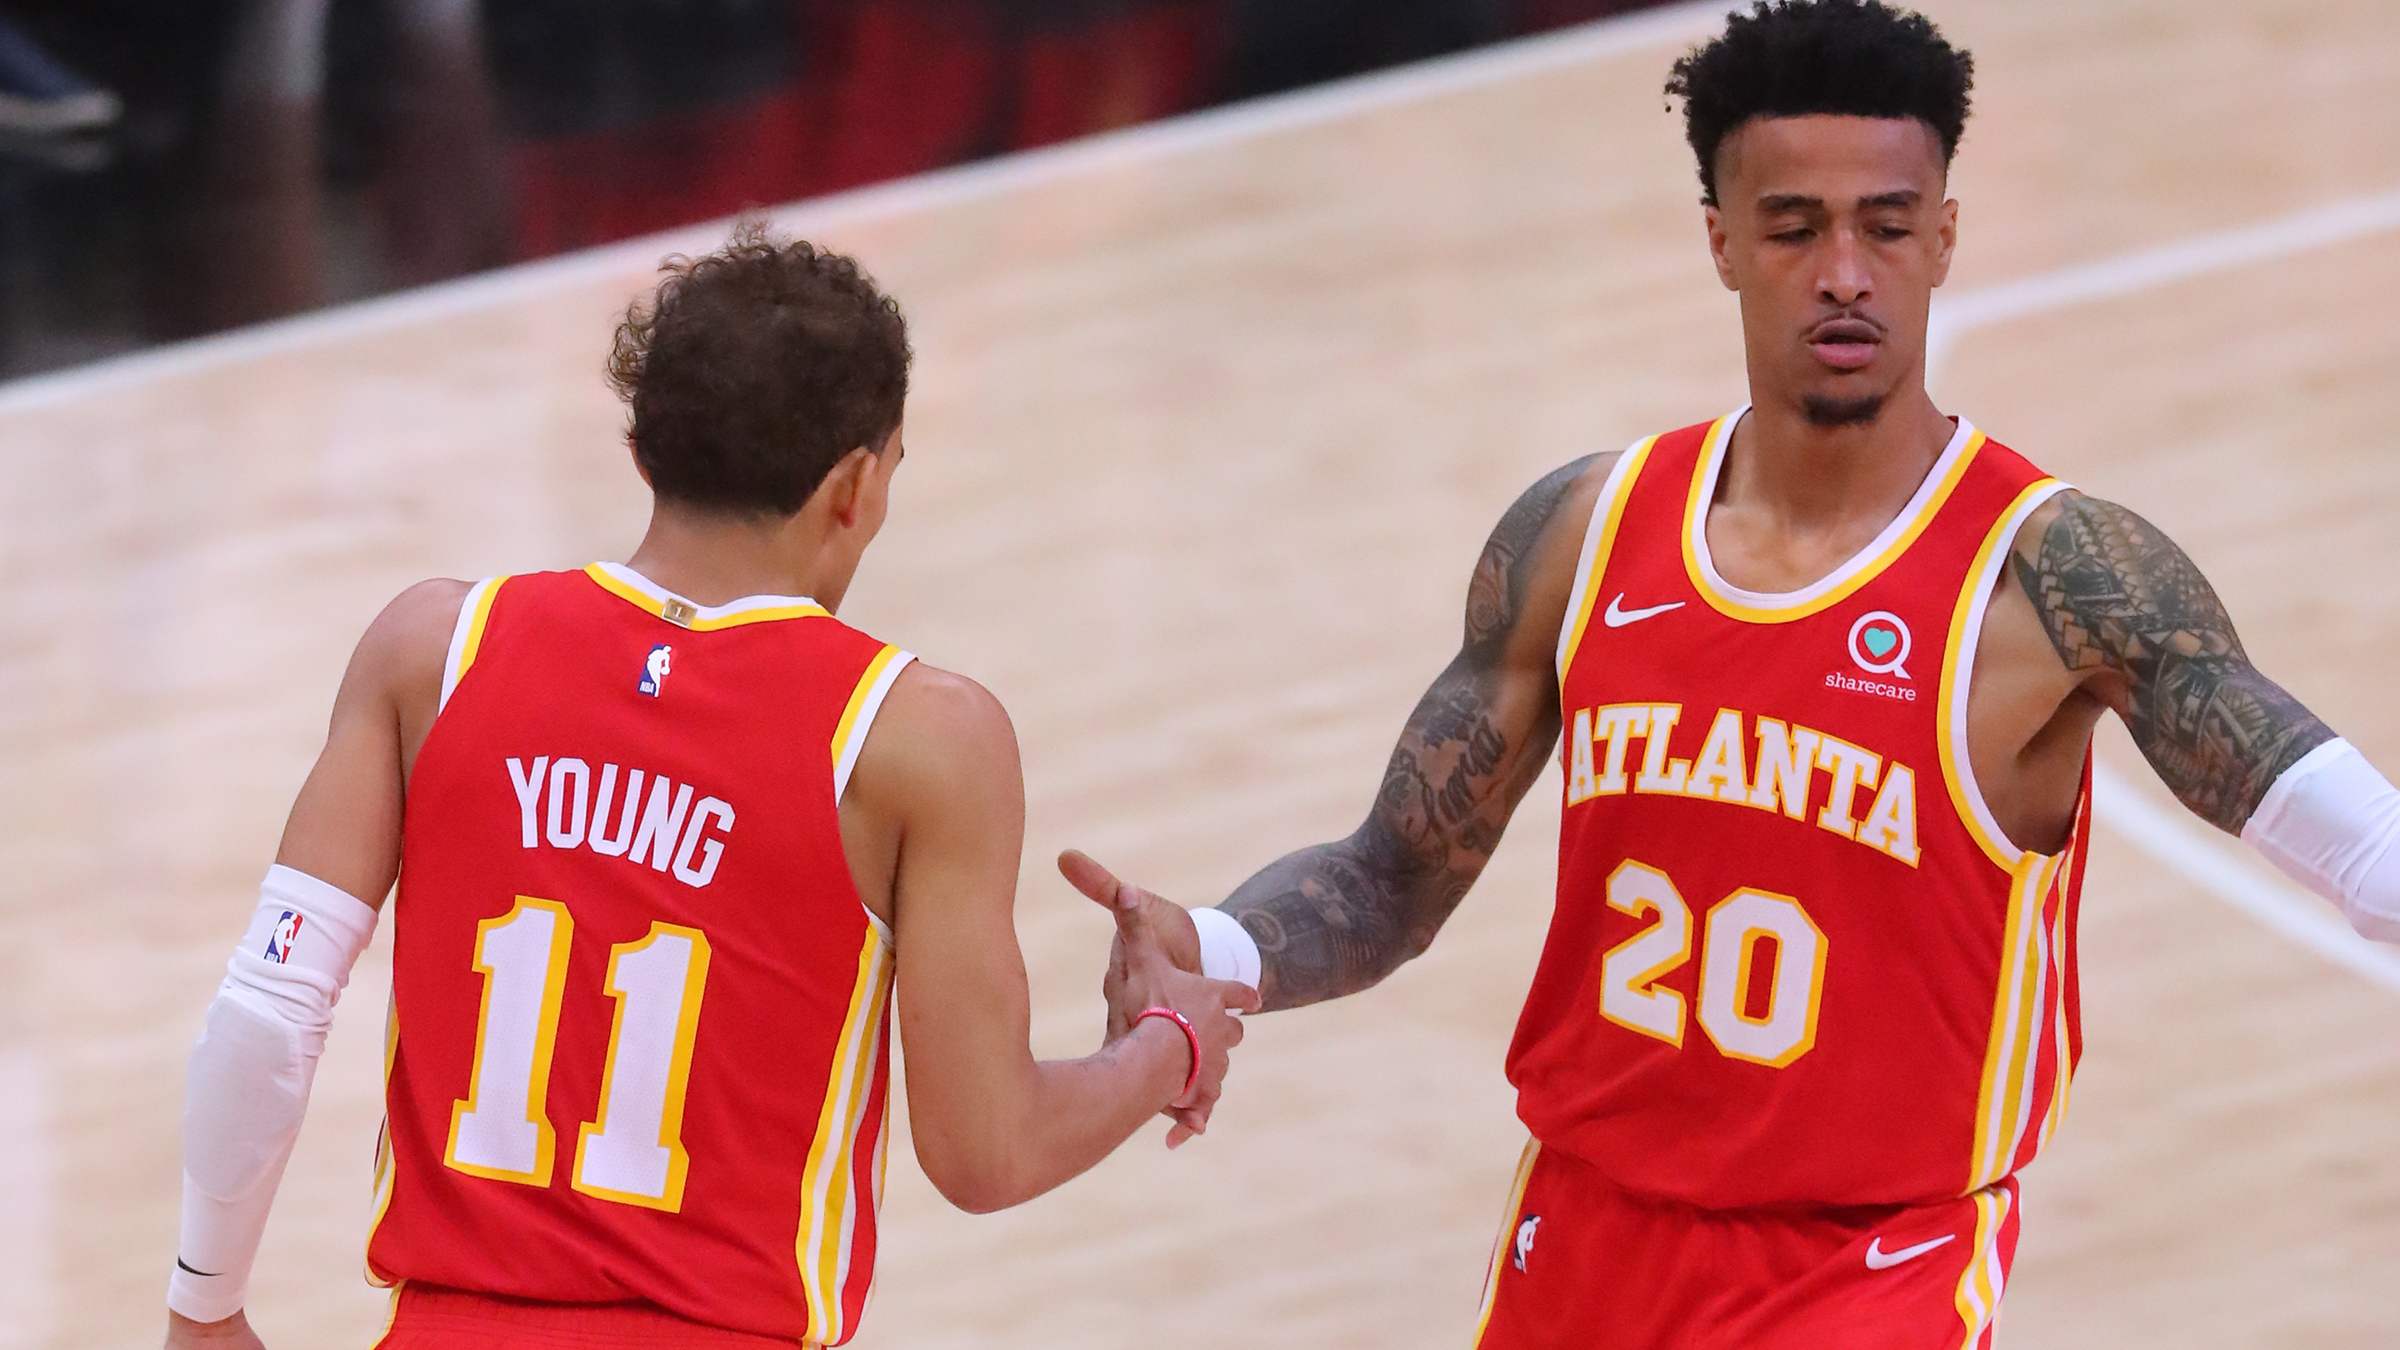 John Collins' game could blossom beautifully for Hawks if given